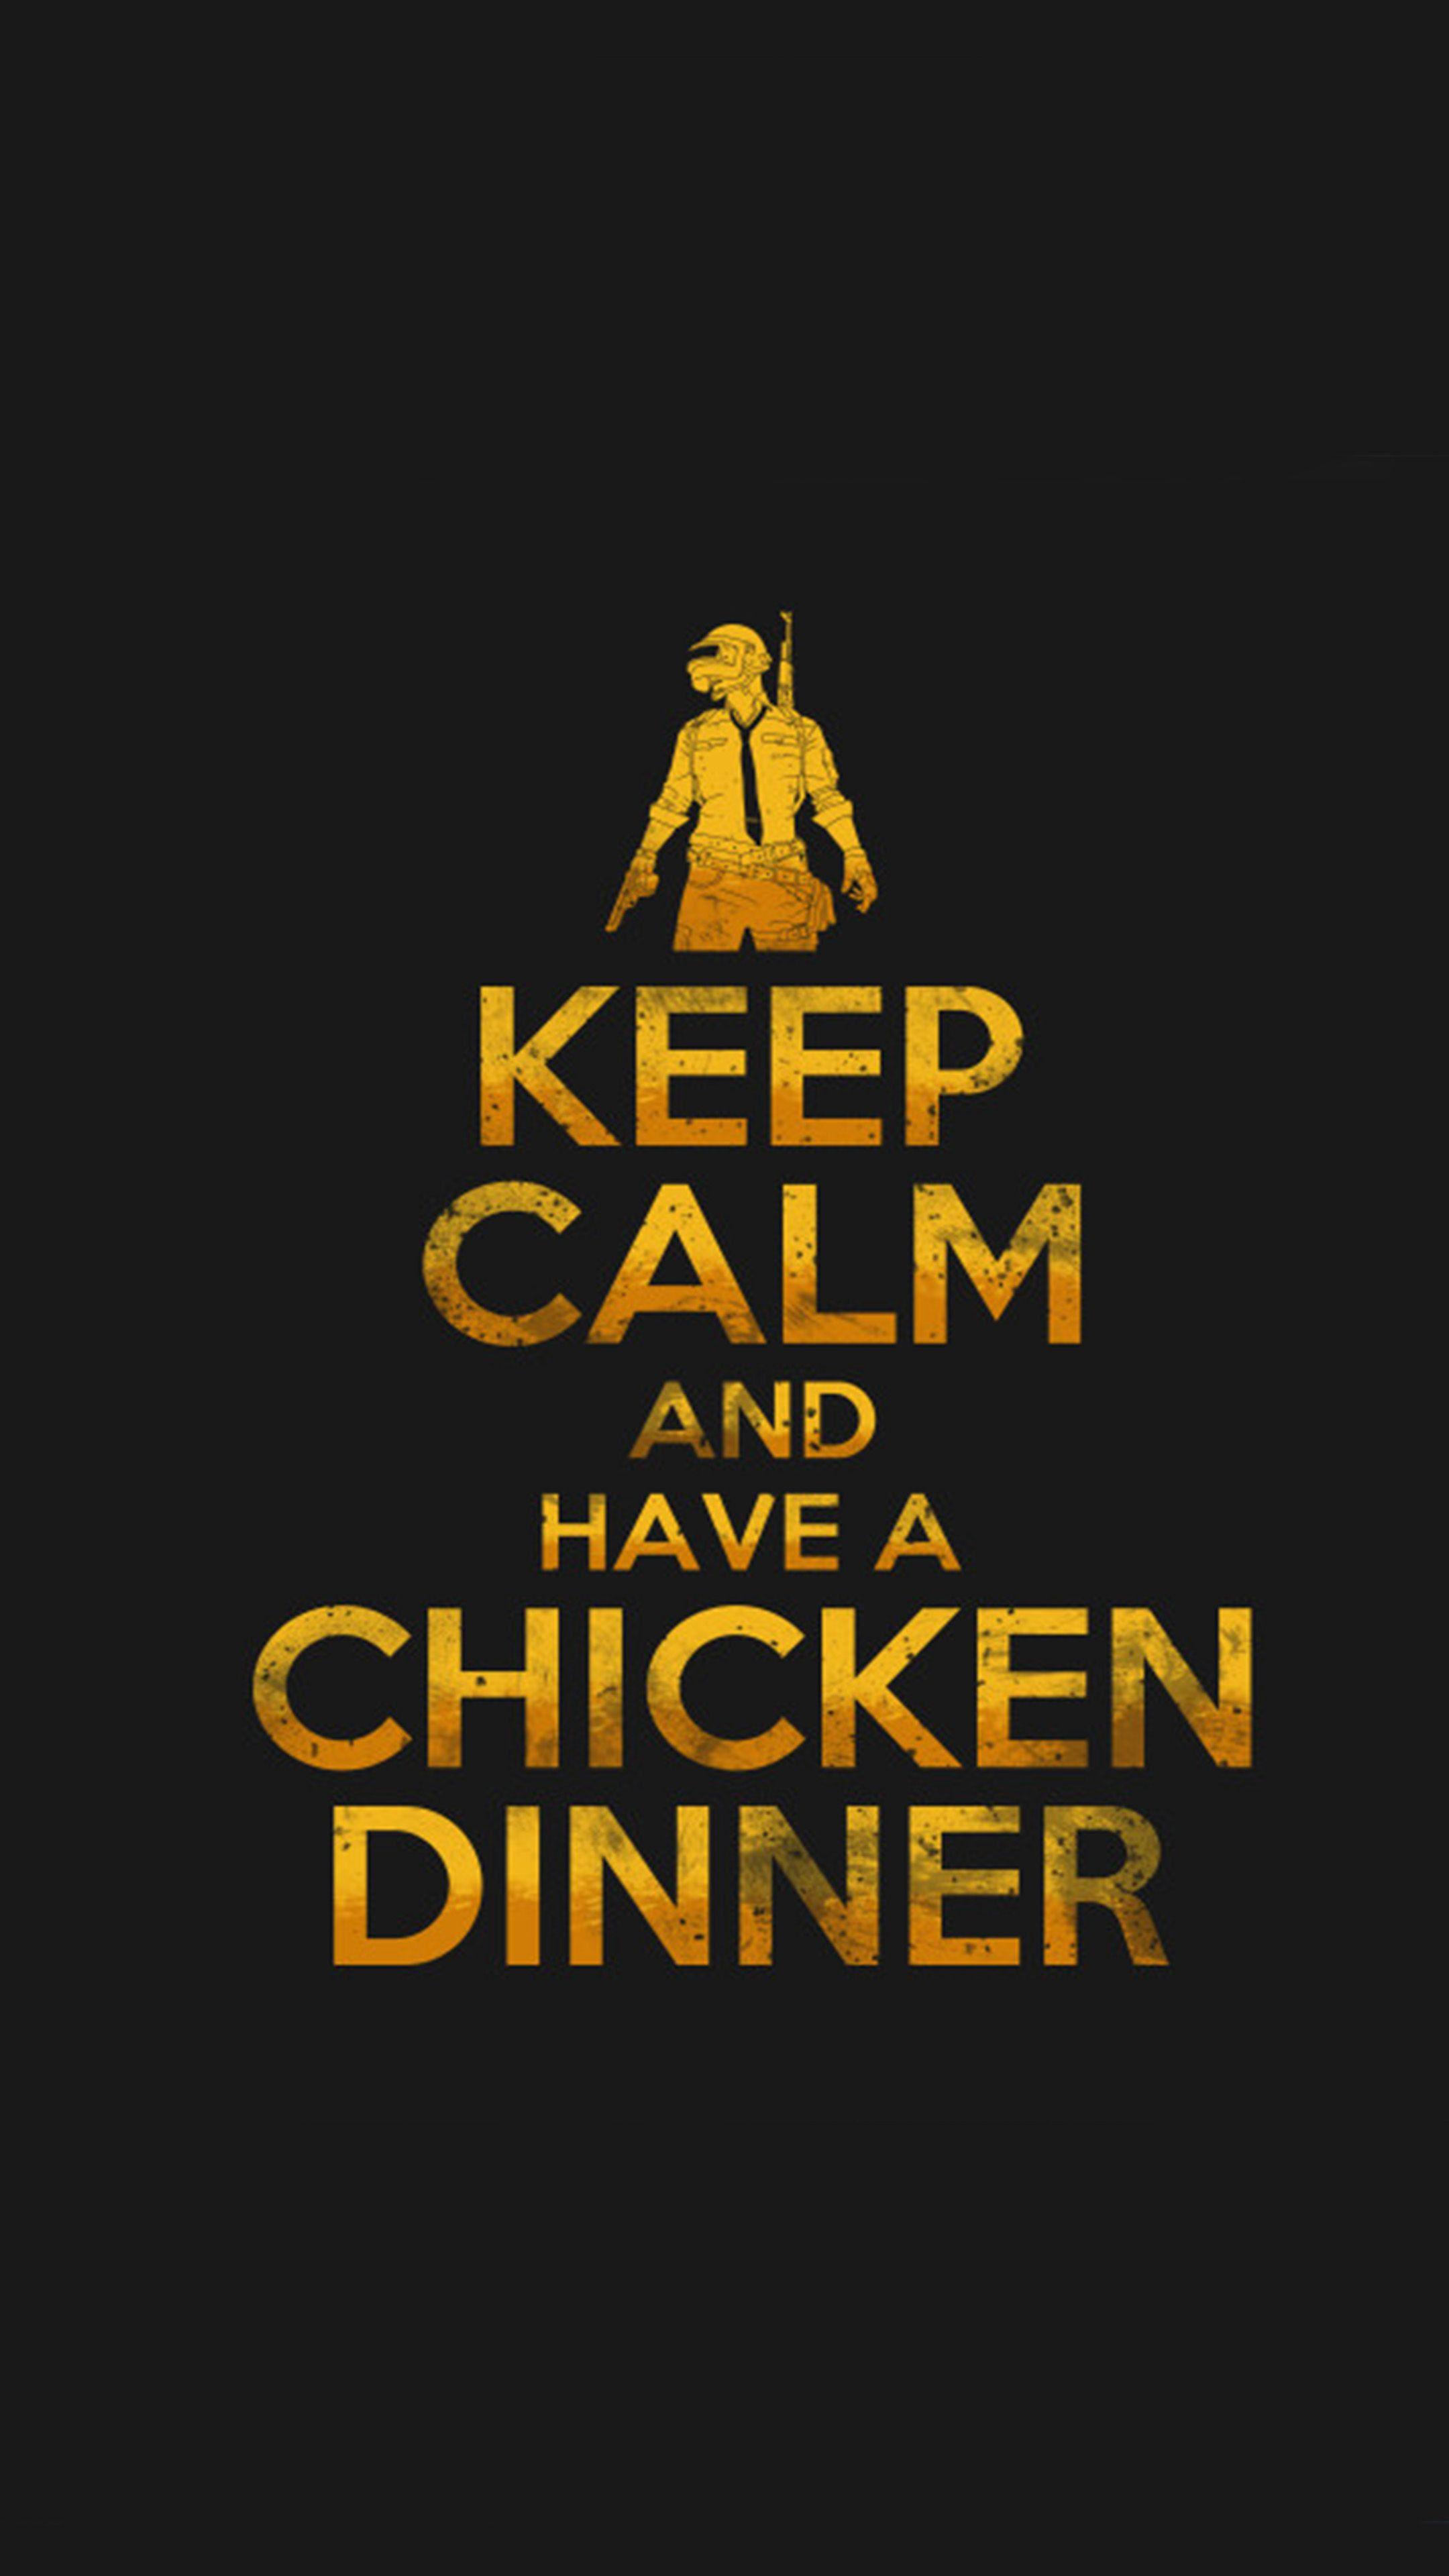 Download PUBG Keep Calm And Have A Chicken Dinner Free Pure 4K Ultra